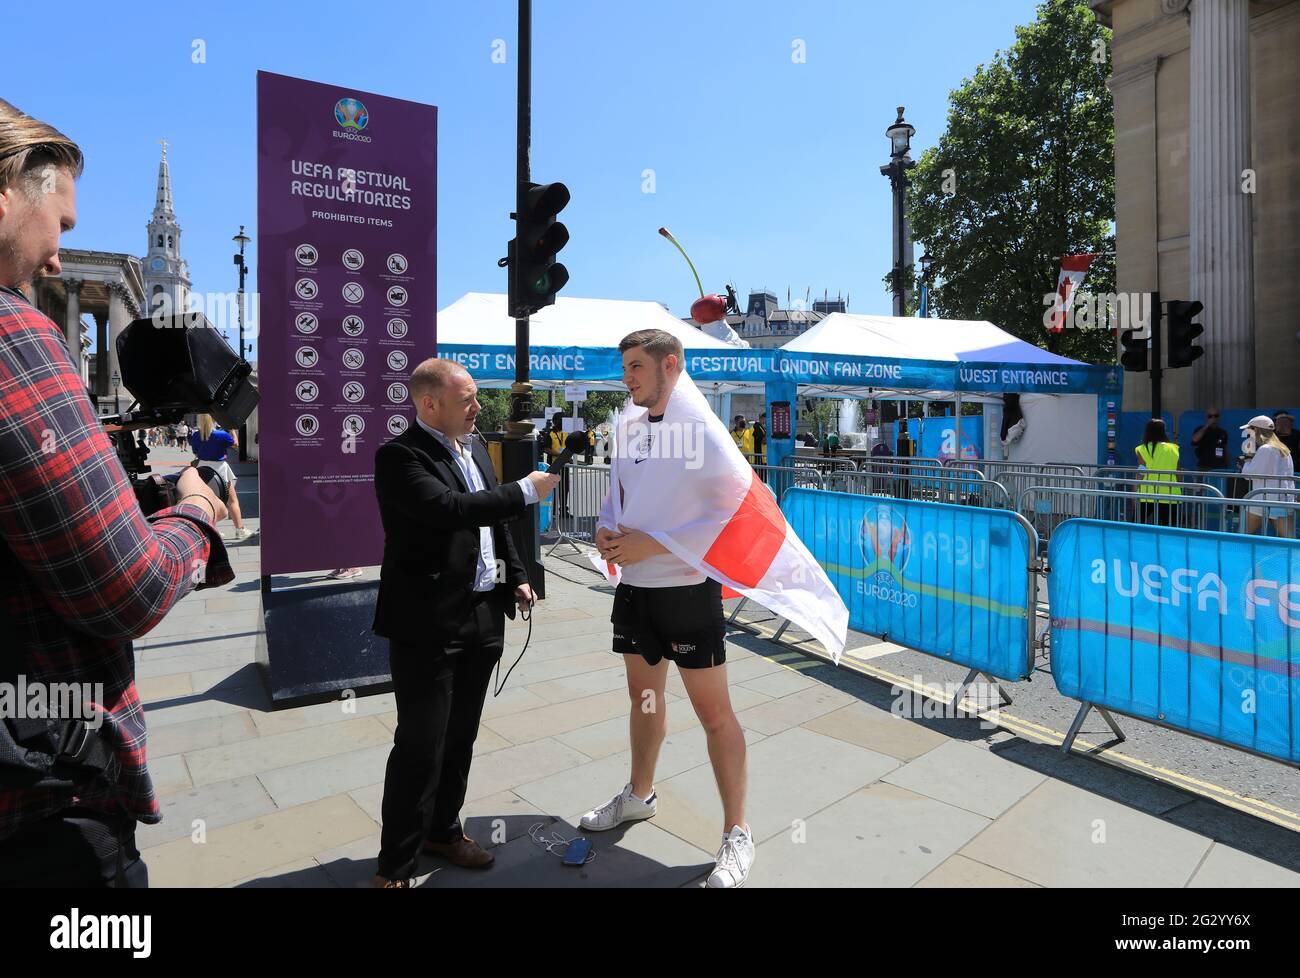 Exclusive key worker access - NHS staff, police and transport workers - to the Euros Fan Zone in Trafalgar Square, for the 1st England match, in London, UK Stock Photo